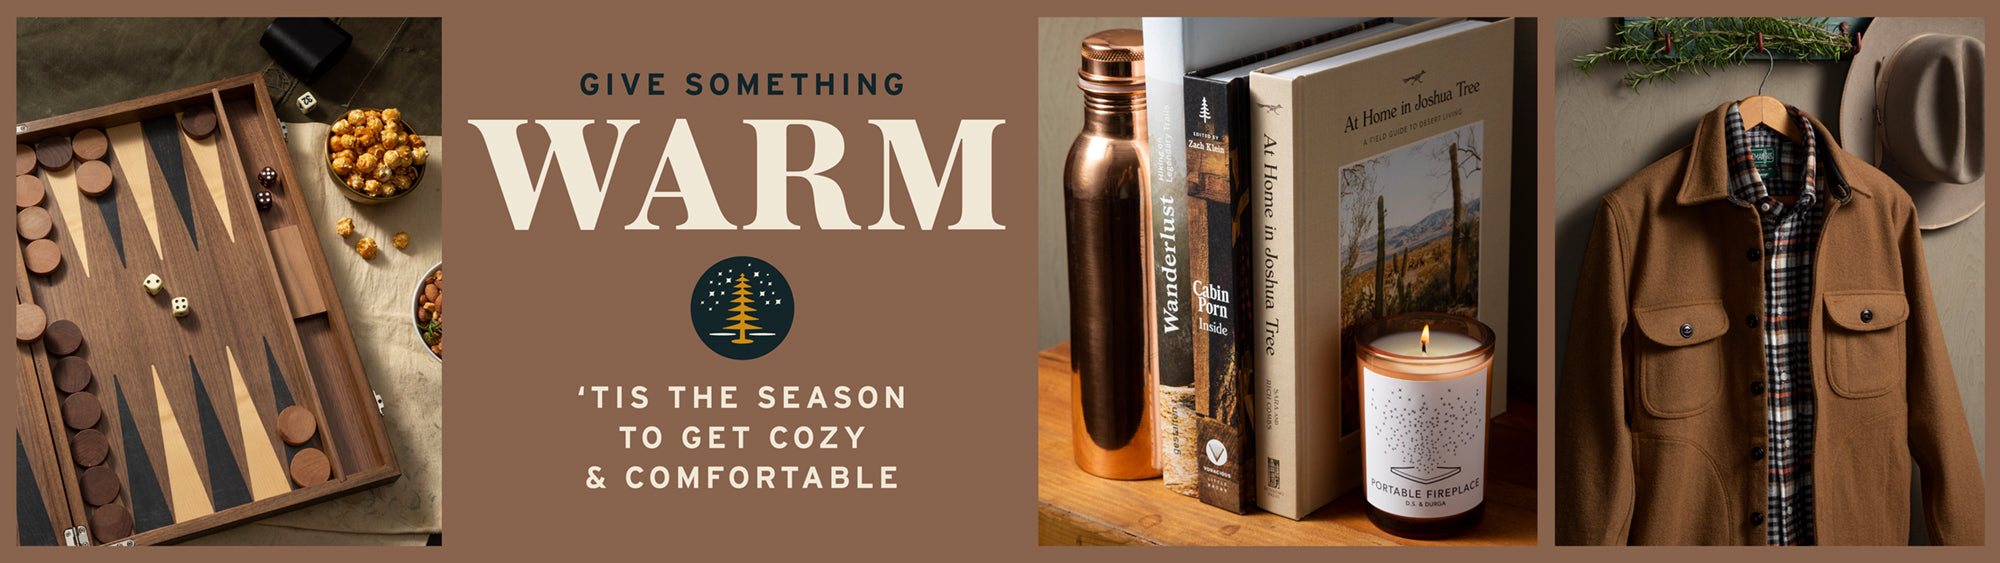 Gift Guide - Give Something Warm | STAG